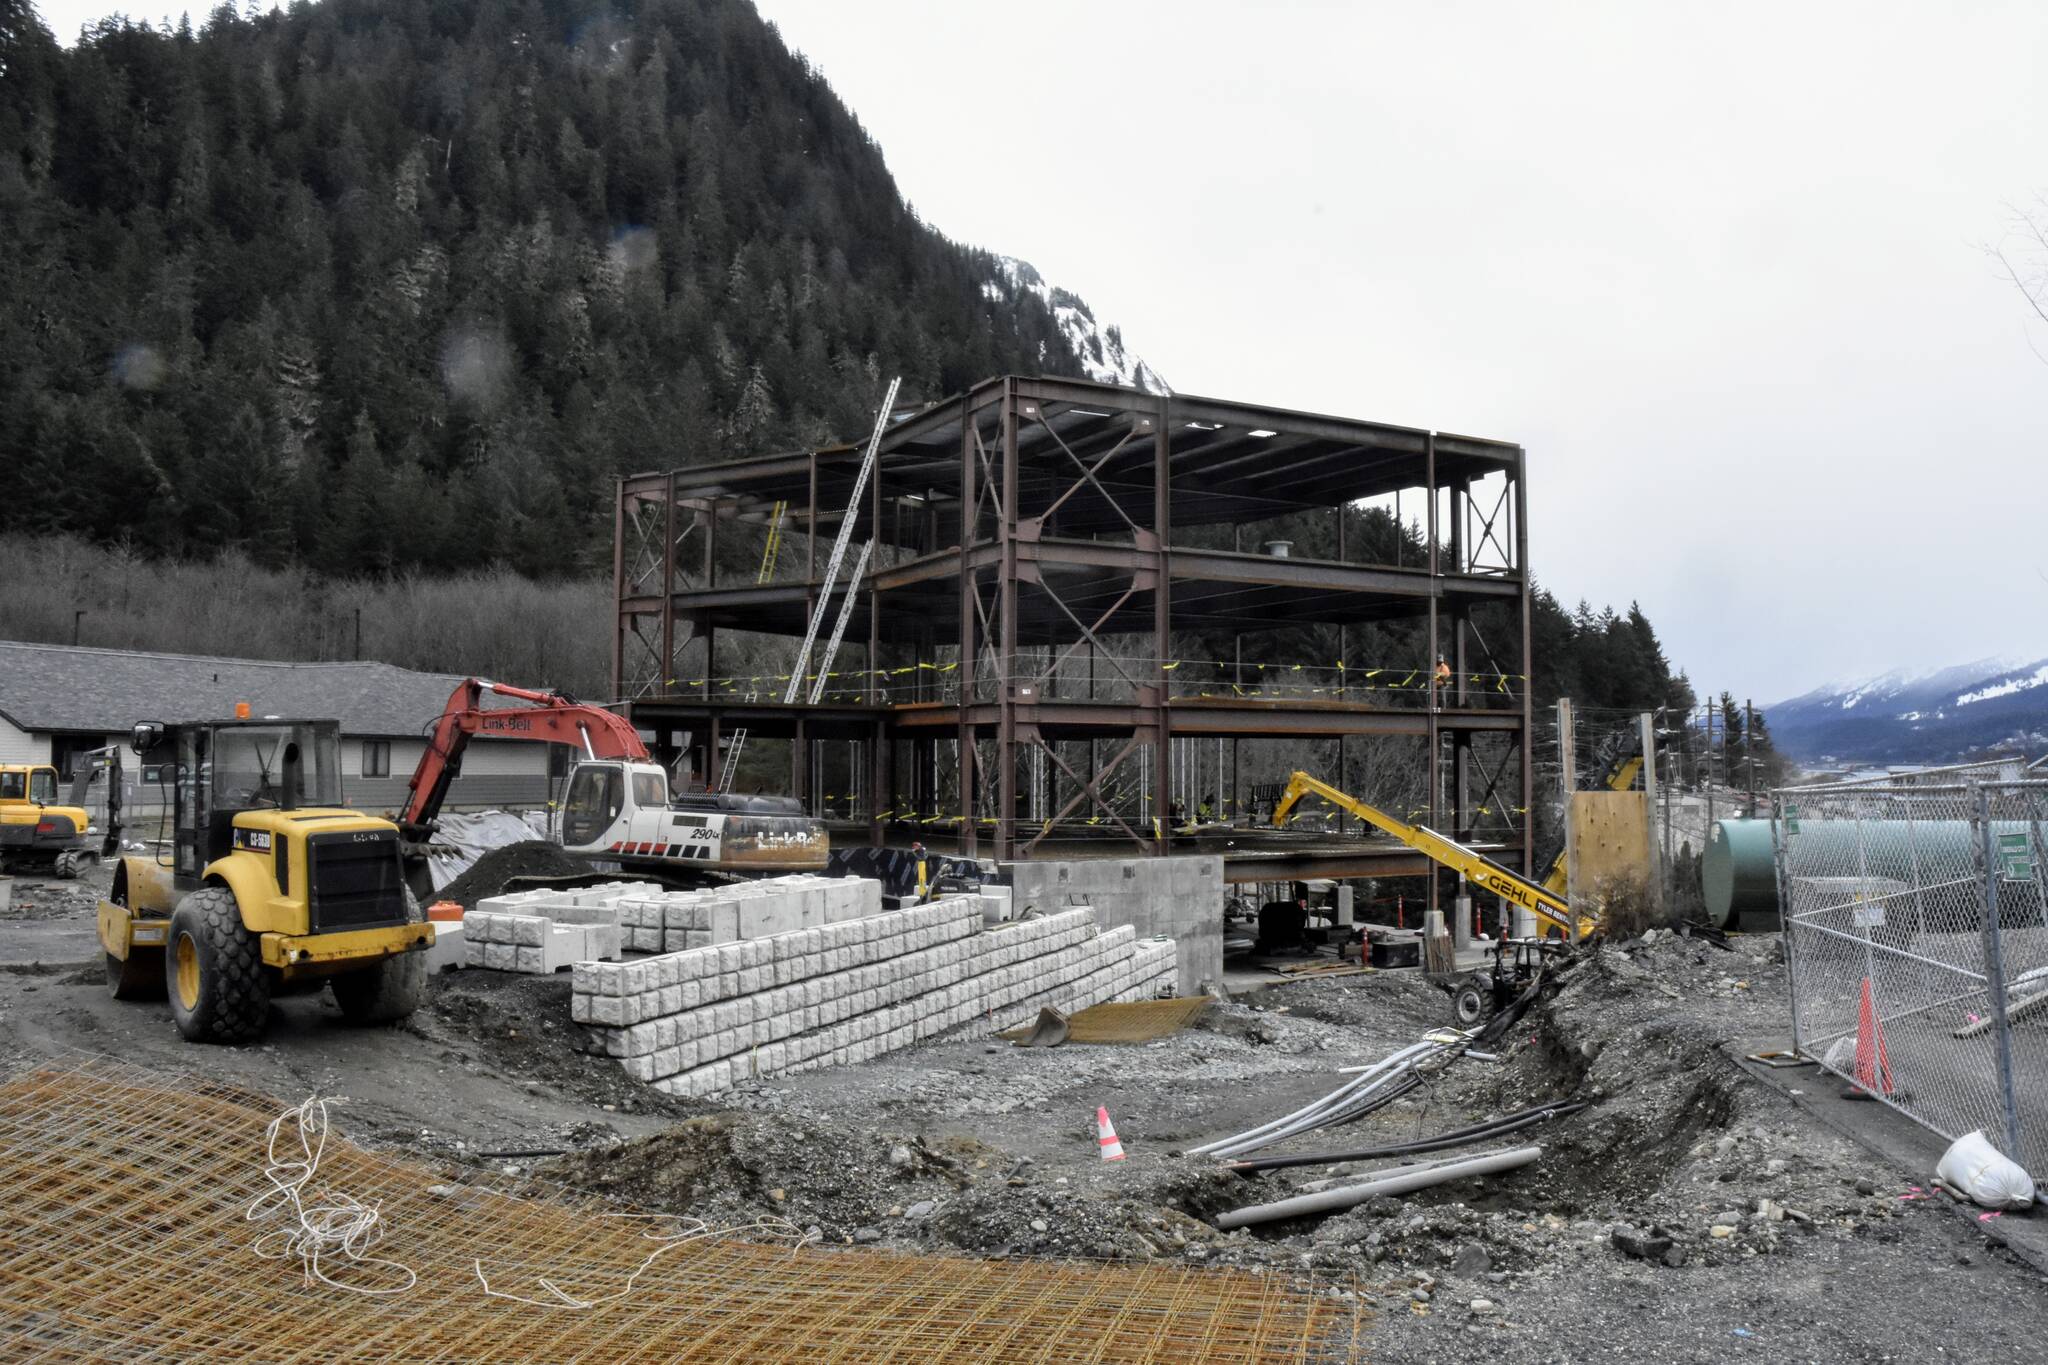 A new crisis stabilization center at Bartlett Regional Hospital was being built on Thursday, March 24, 2022, and will house three floors of services dedicated to behavioral health. (Peter Segall / Juneau Empire)